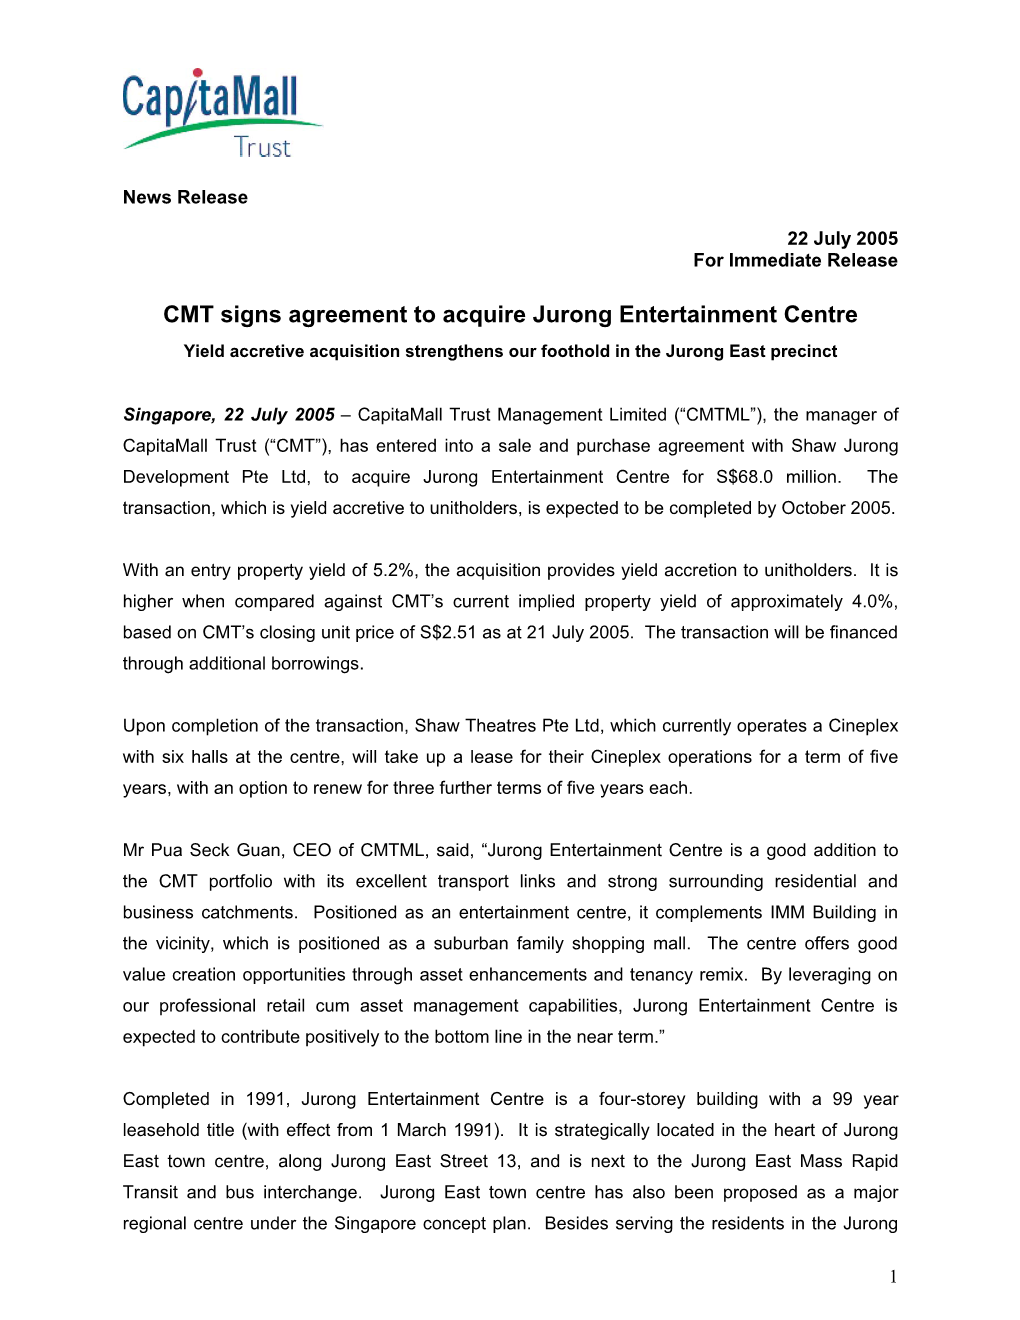 CMT Signs Agreement to Acquire Jurong Entertainment Centre Yield Accretive Acquisition Strengthens Our Foothold in the Jurong East Precinct